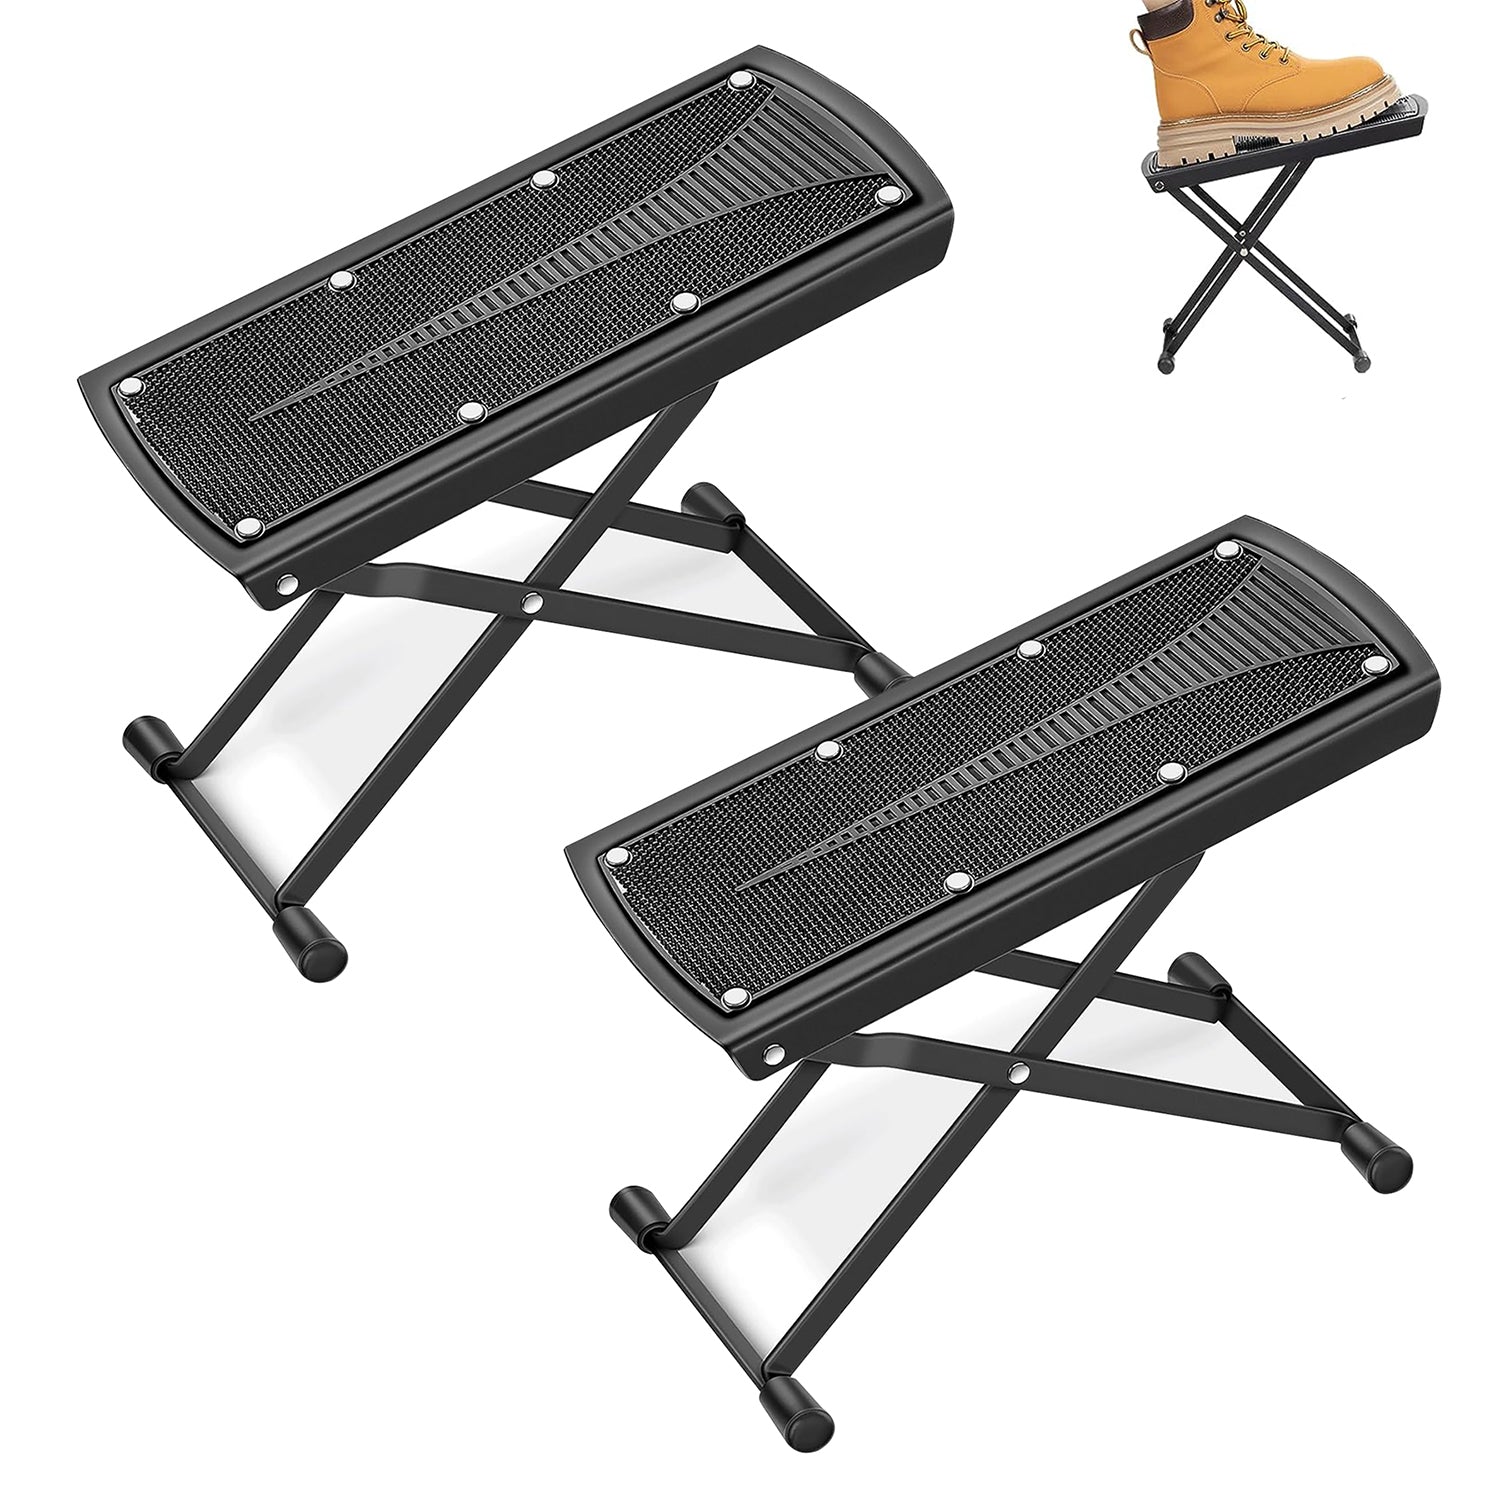 5 Core 2 Pieces Guitar Footstool Stand Black Adjustable Guitar Foot Rest Solid Iron Guitar Foot Stand with 6 Level Height Sturdy and Durable Guitar Leg Rest Step Pedal - GFS BLK 2PCS